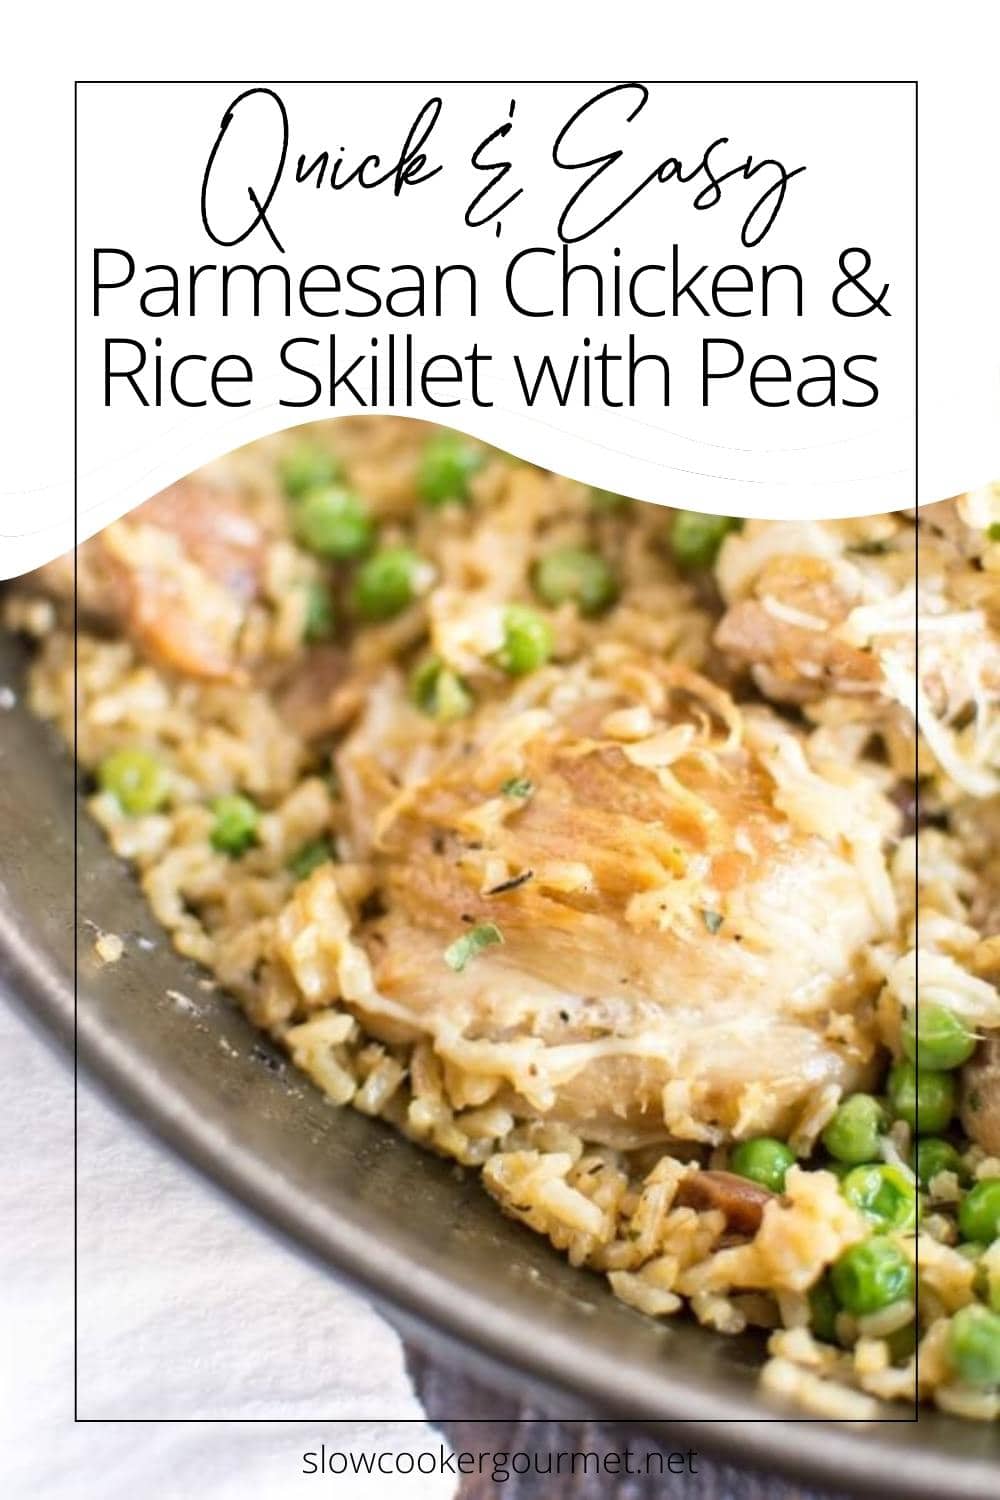 Parmesan Chicken and Rice Skillet with Peas - Slow Cooker Gourmet